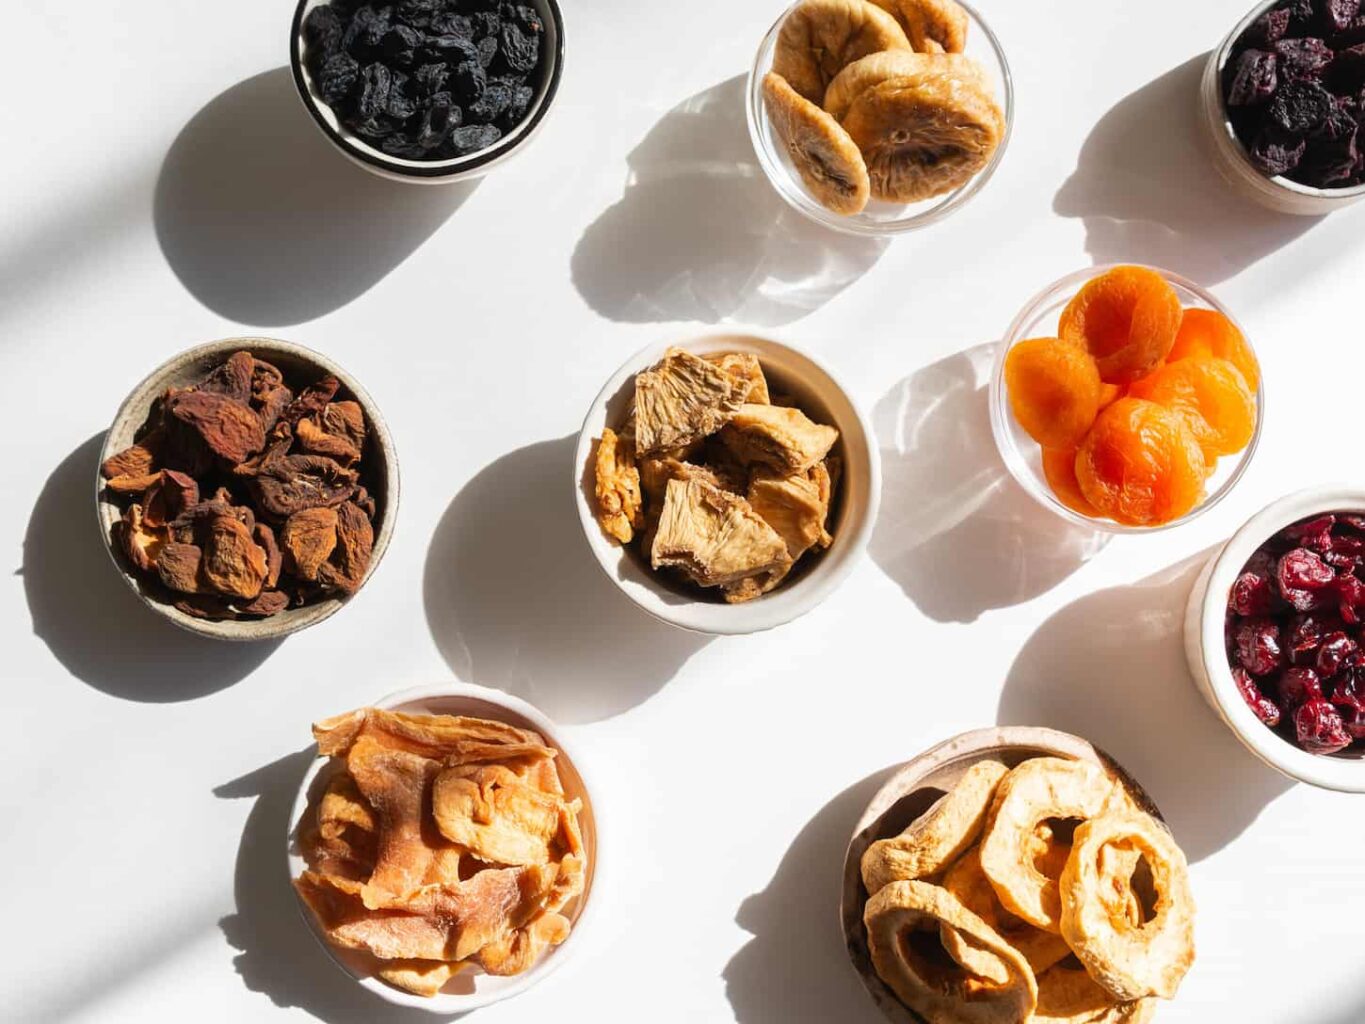 An image of dried or sun-dried berries and fruits in bowls on white background with shadows. 